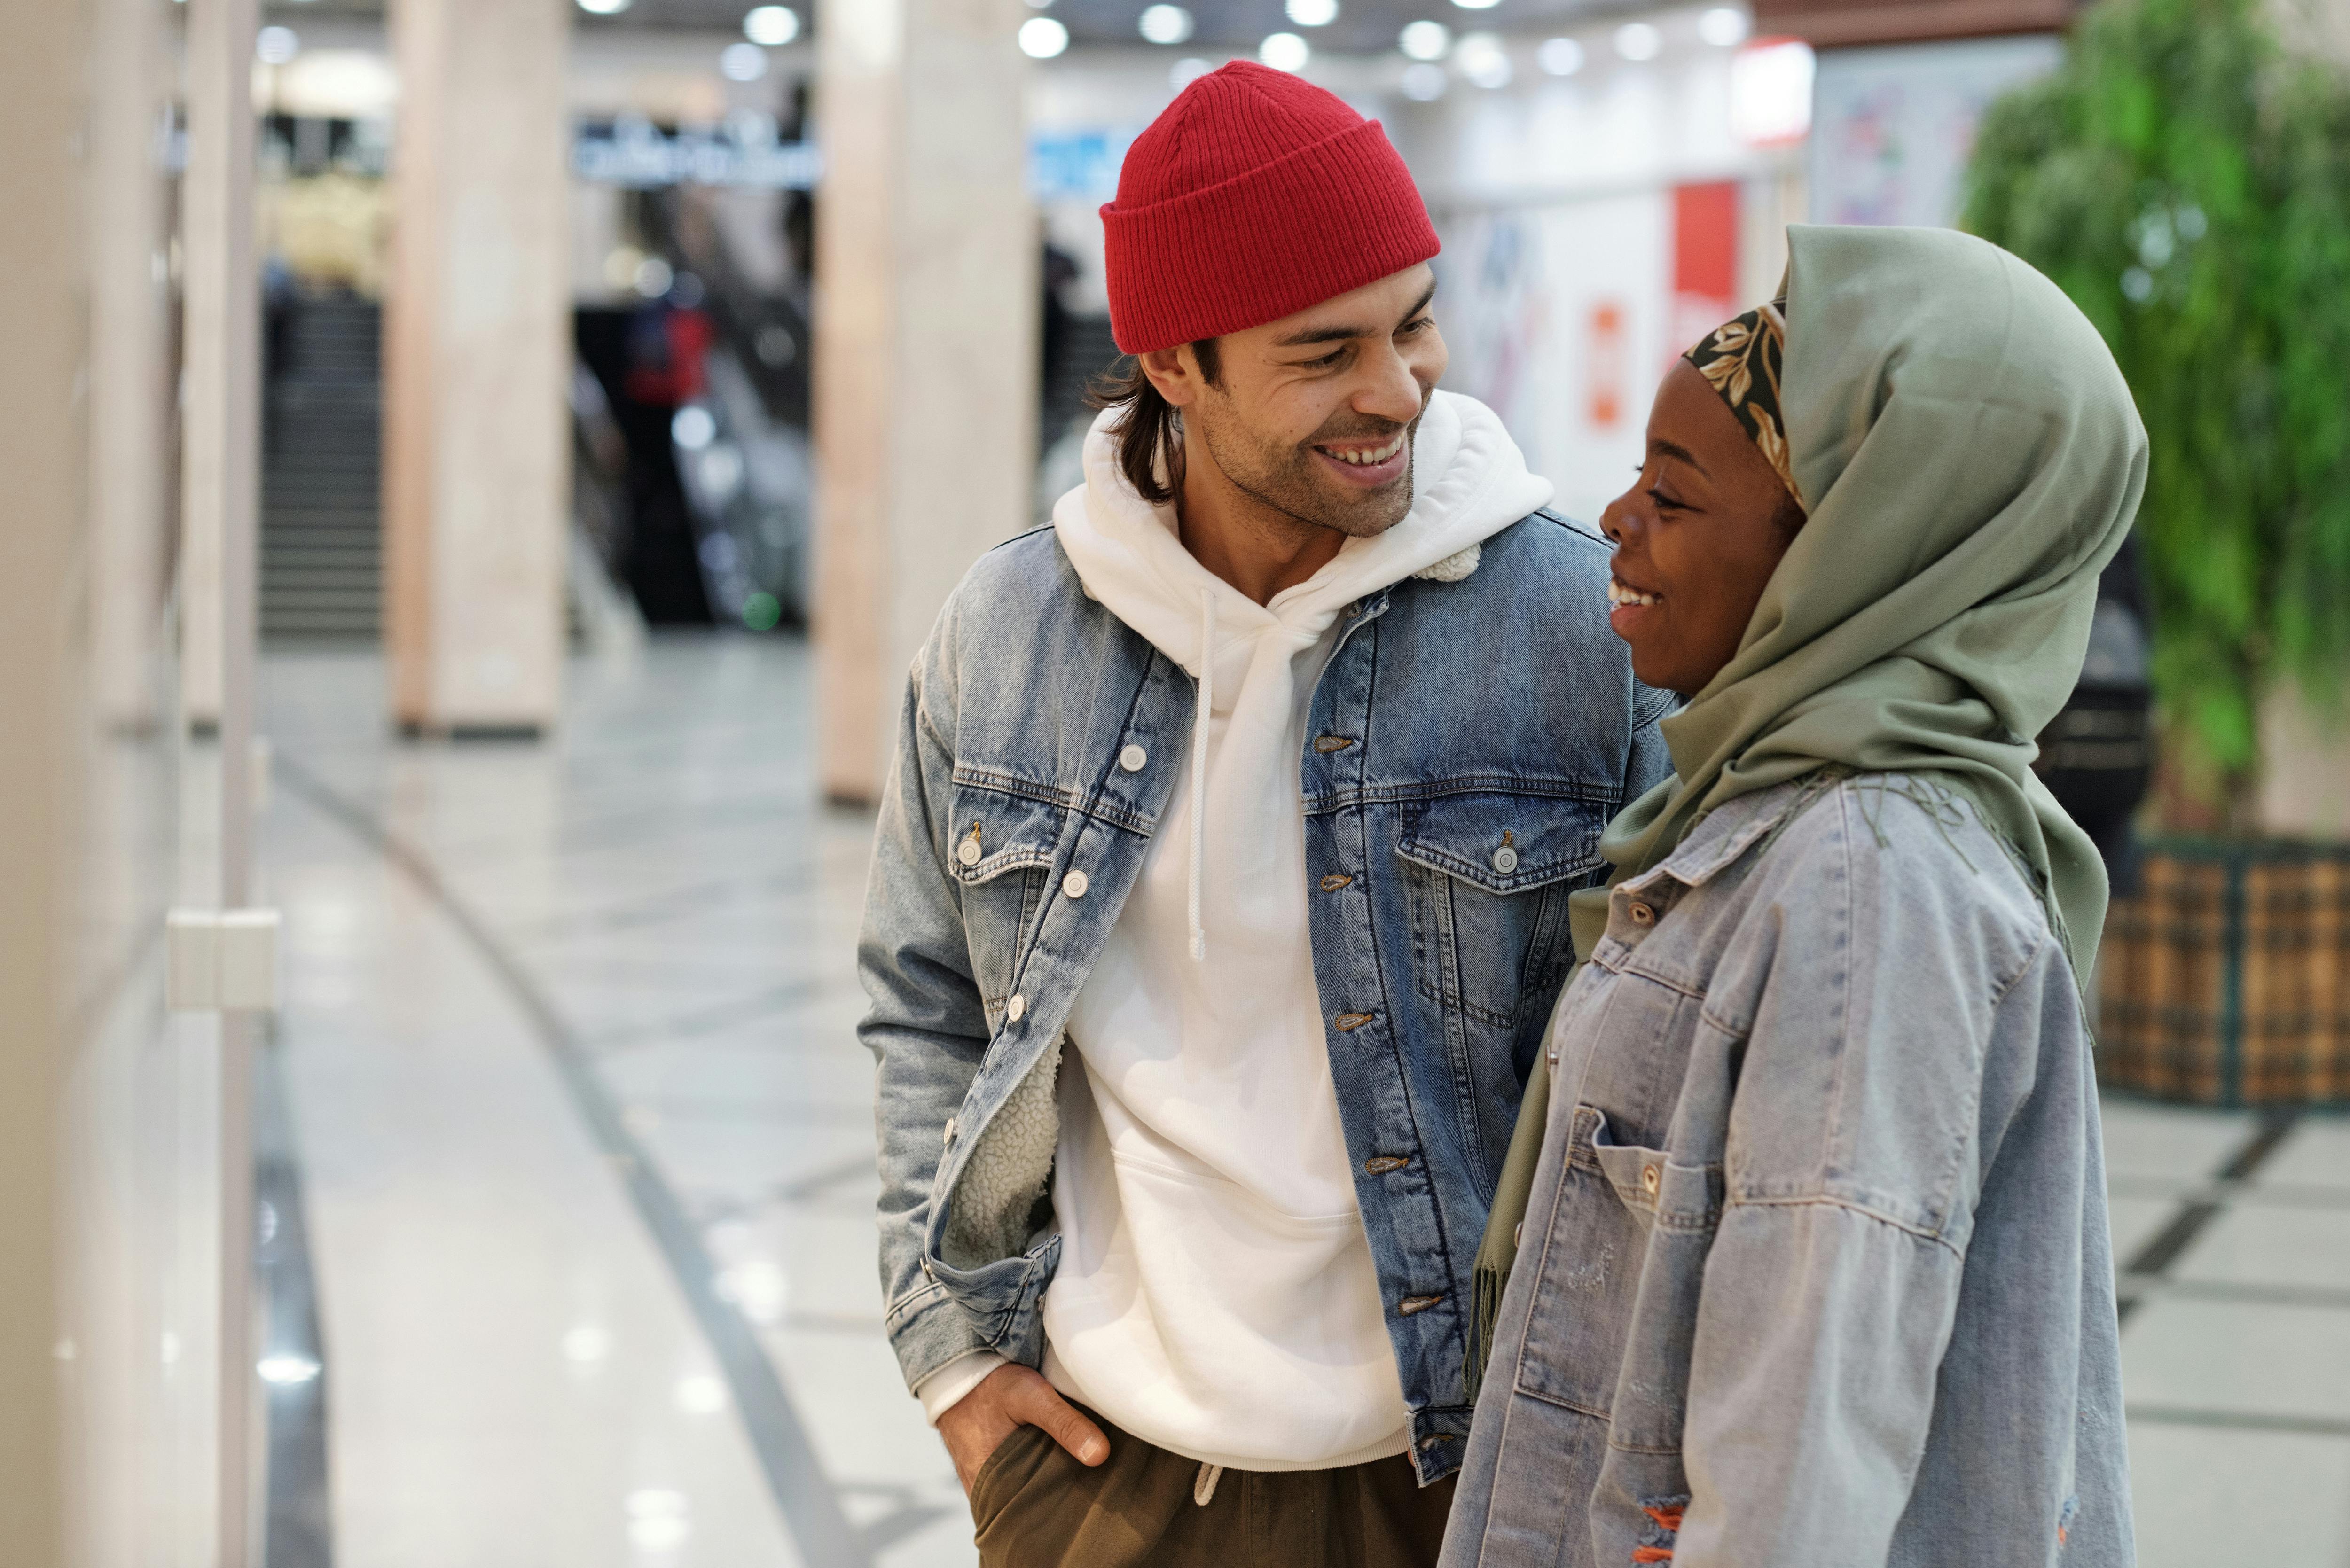 muslim couple in shopping mall